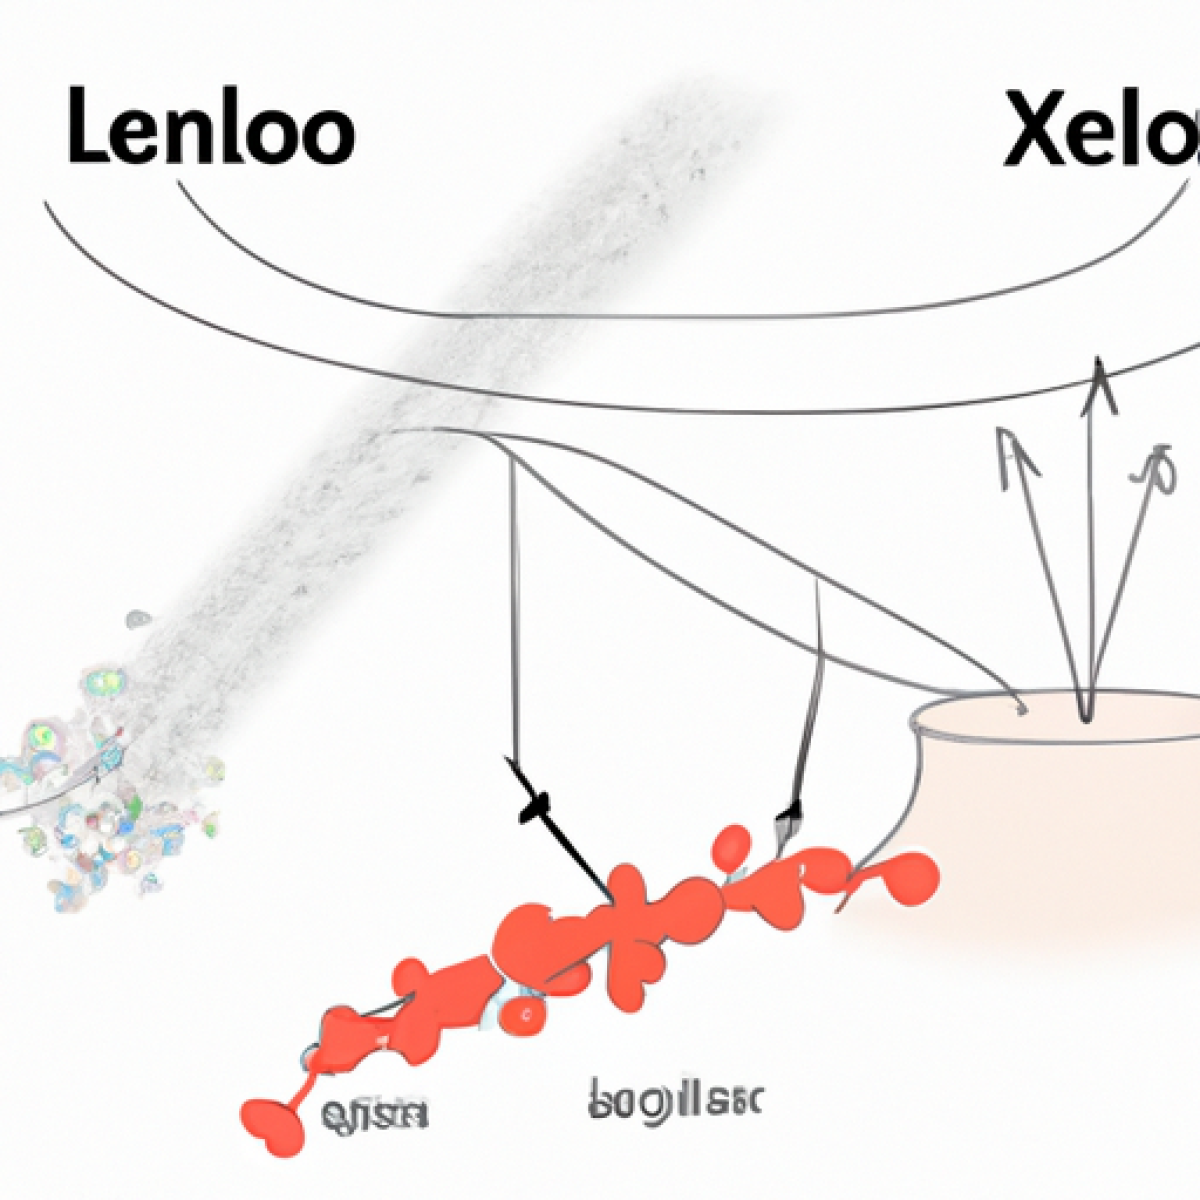 A detail image related to the topic: Xileno